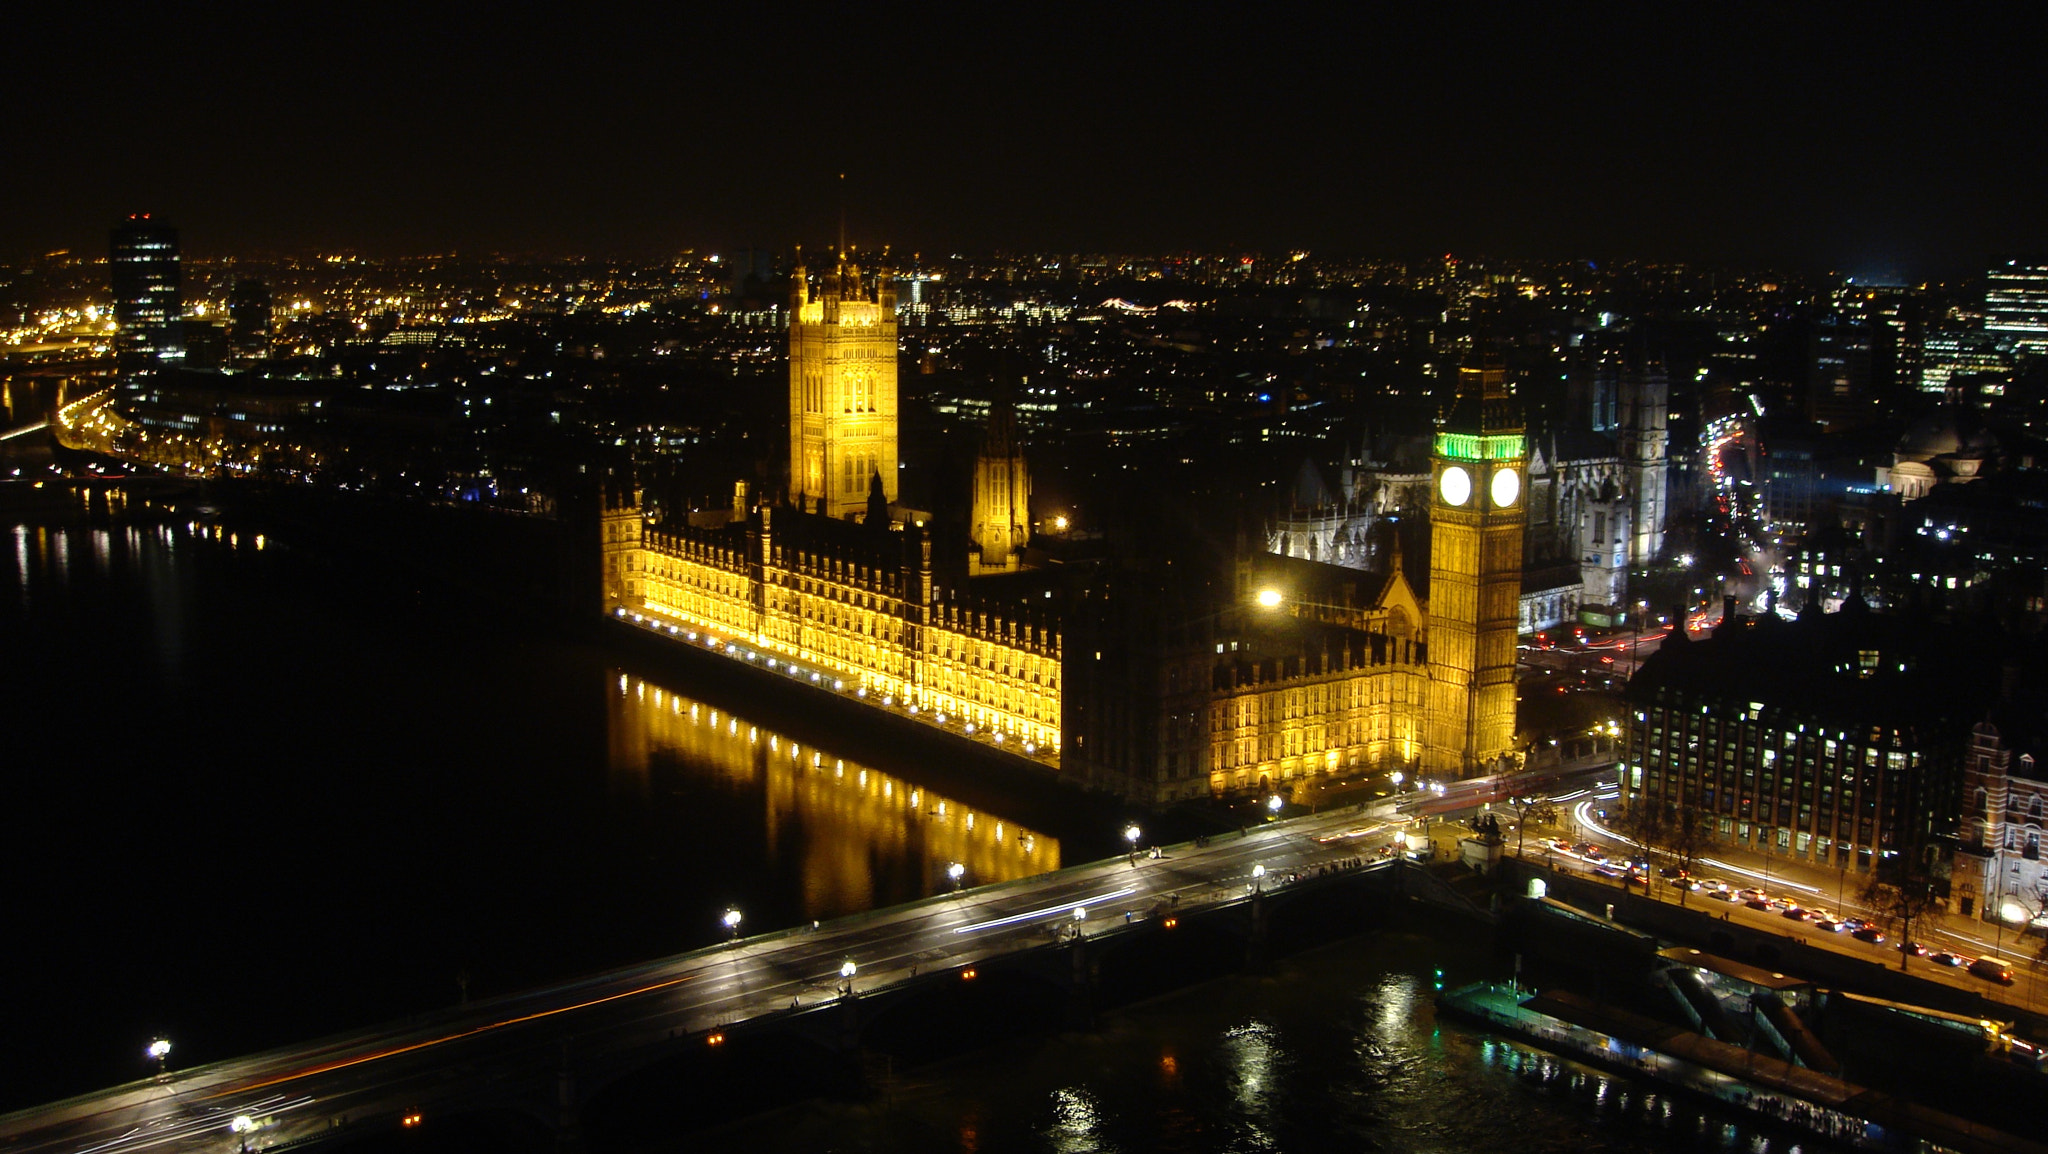 Sony DSC-T77 sample photo. Palace of westminster photography